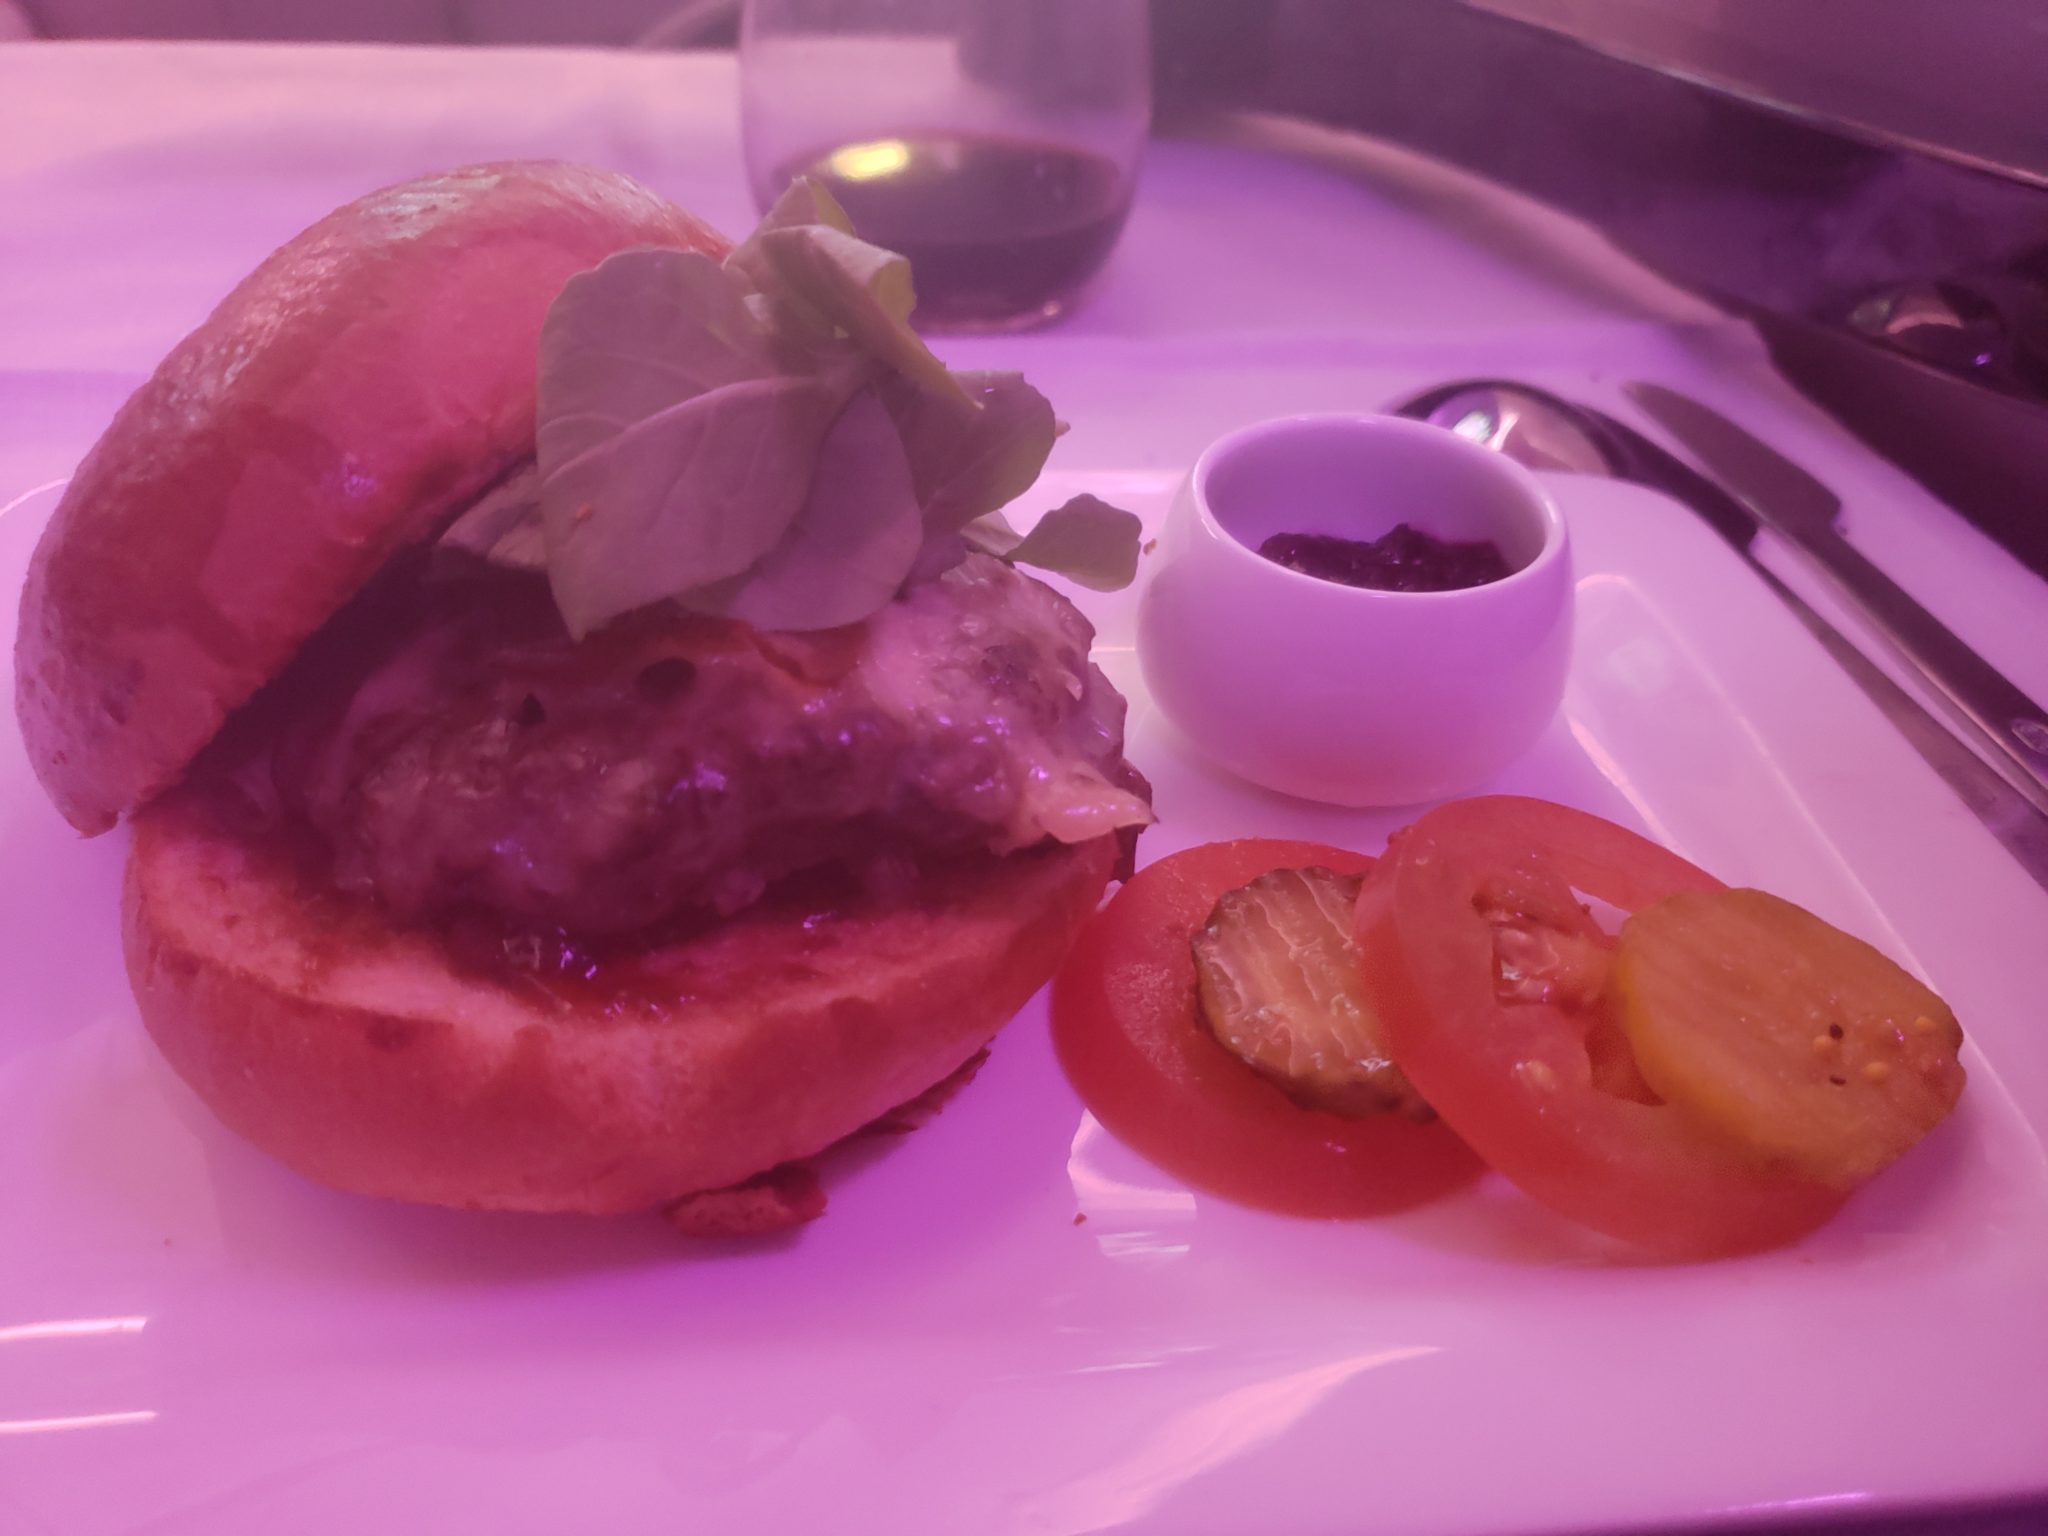 a burger and tomatoes on a plate